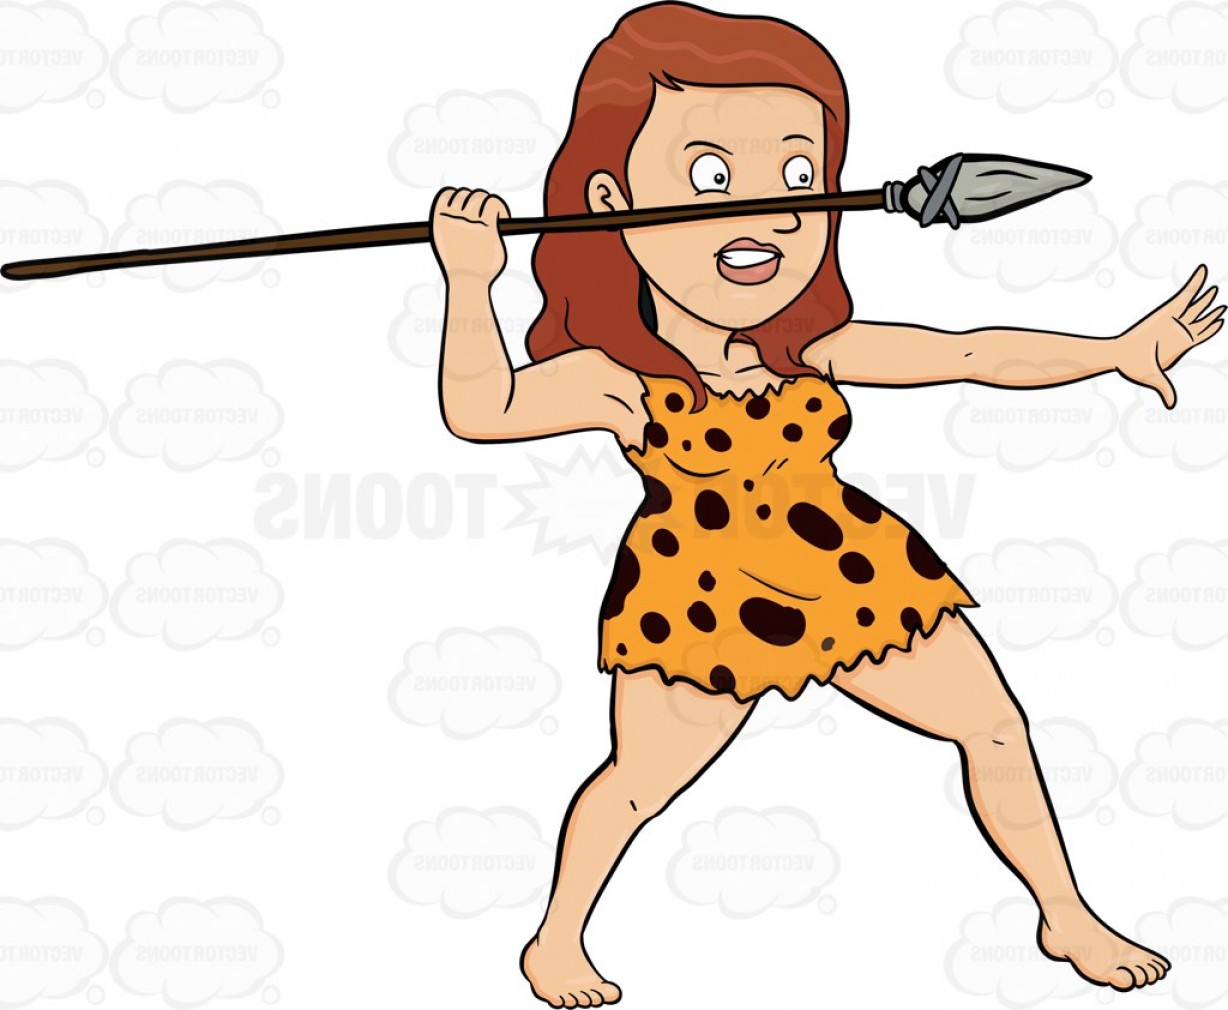 Cavewoman aggressively holds.